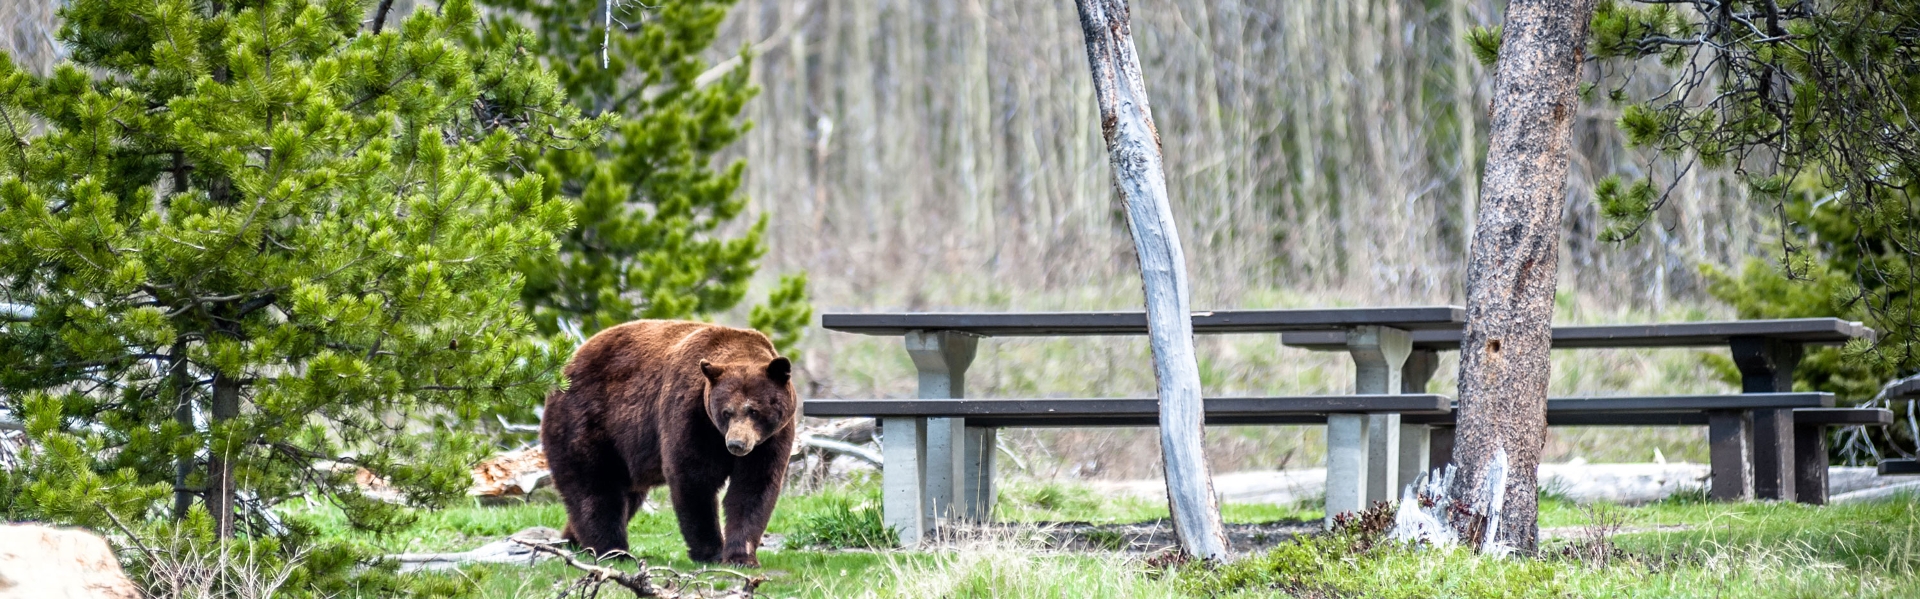 A bear walking through a campsite with picnic tables.